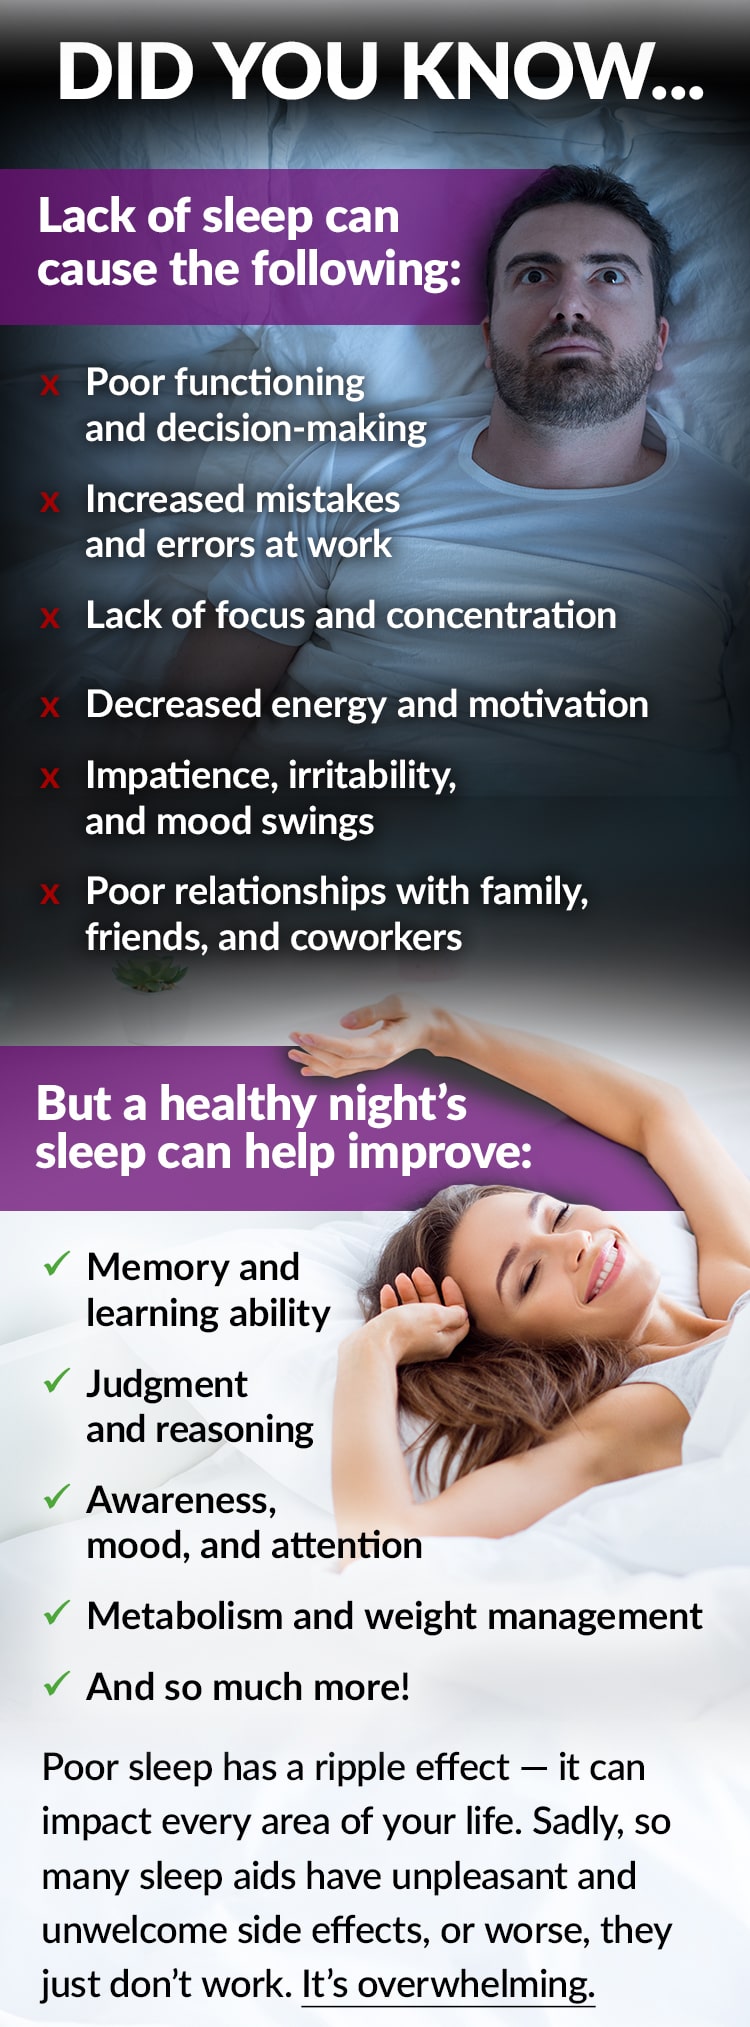 DID YOU KNOW... Lack of sleep can cause the following: Poor functioning and decision-making, Increased mistakes and errors at work, Lack of focus and concentration, Decreased energy and motivation, Impatience, irritability, and mood swings, Poor relationships with family, friends, and coworkers. But a healthy night’s sleep can help improve: Memory and learning ability, Judgment and reasoning, Awareness, mood, and attention, Metabolism and weight management, And so much more! Poor sleep has a ripple effect – it can impact every area of your life. Sadly, so many sleep aids have unpleasant and unwelcome side effects, or worse, they just don’t work. It’s overwhelming.